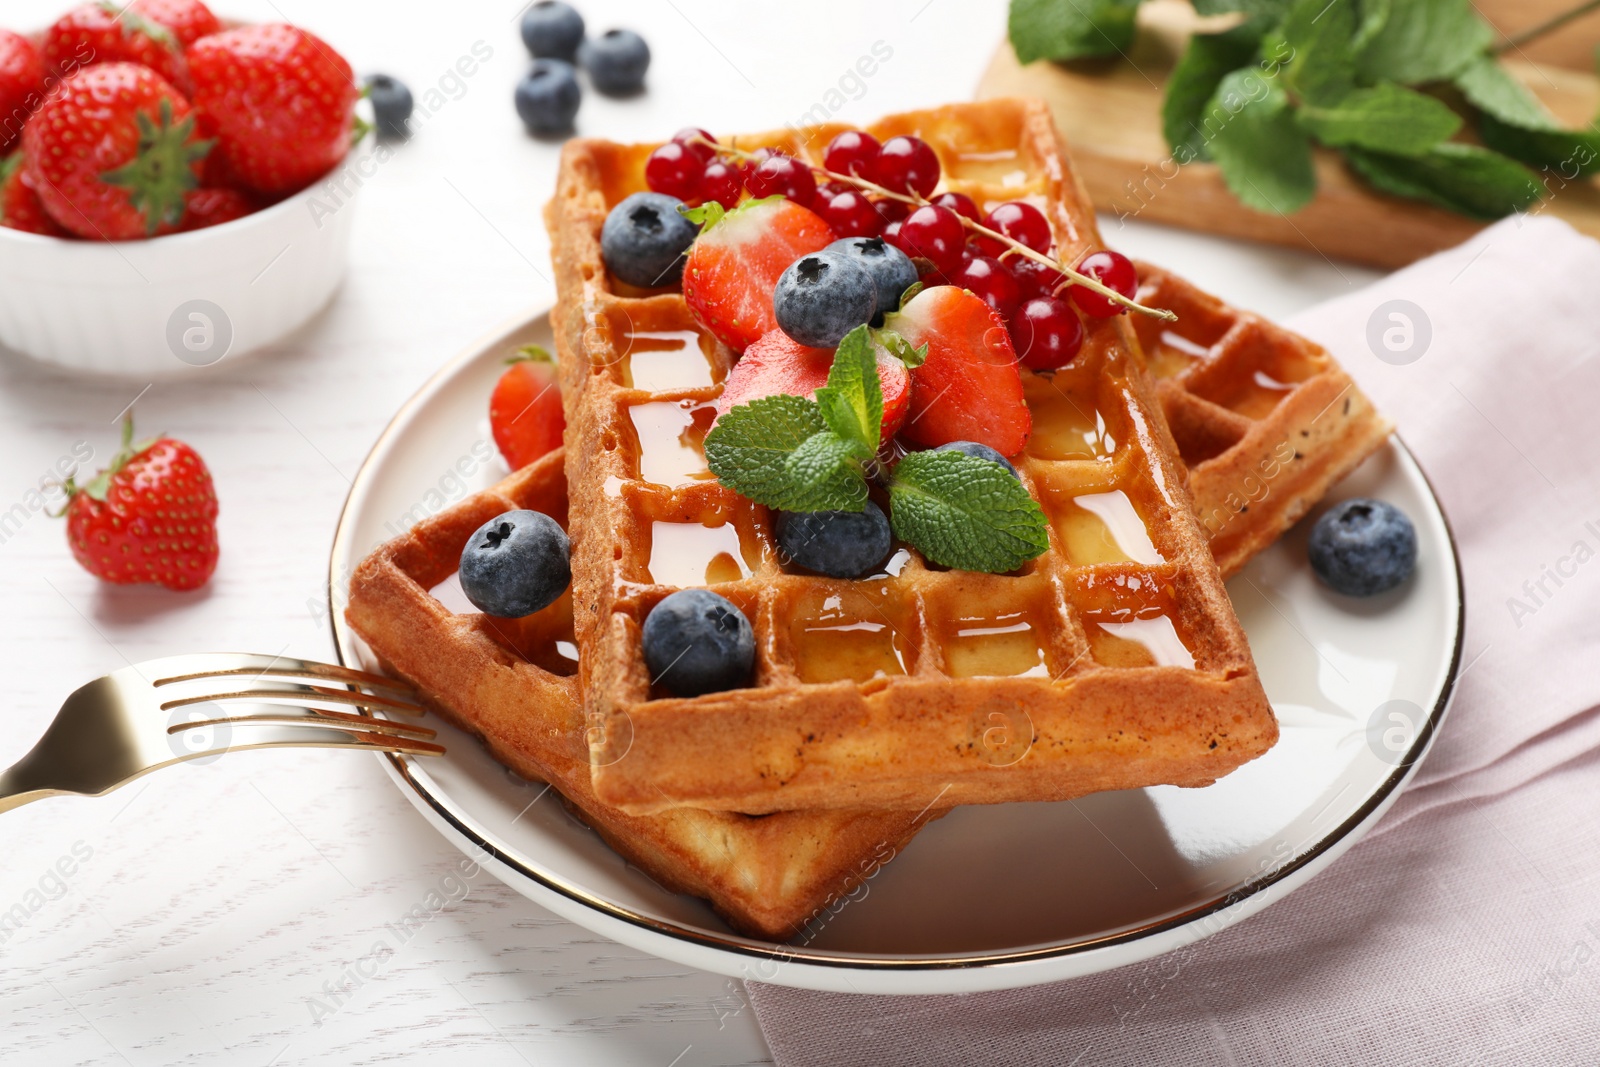 Photo of Delicious Belgian waffles with berries served on white wooden table